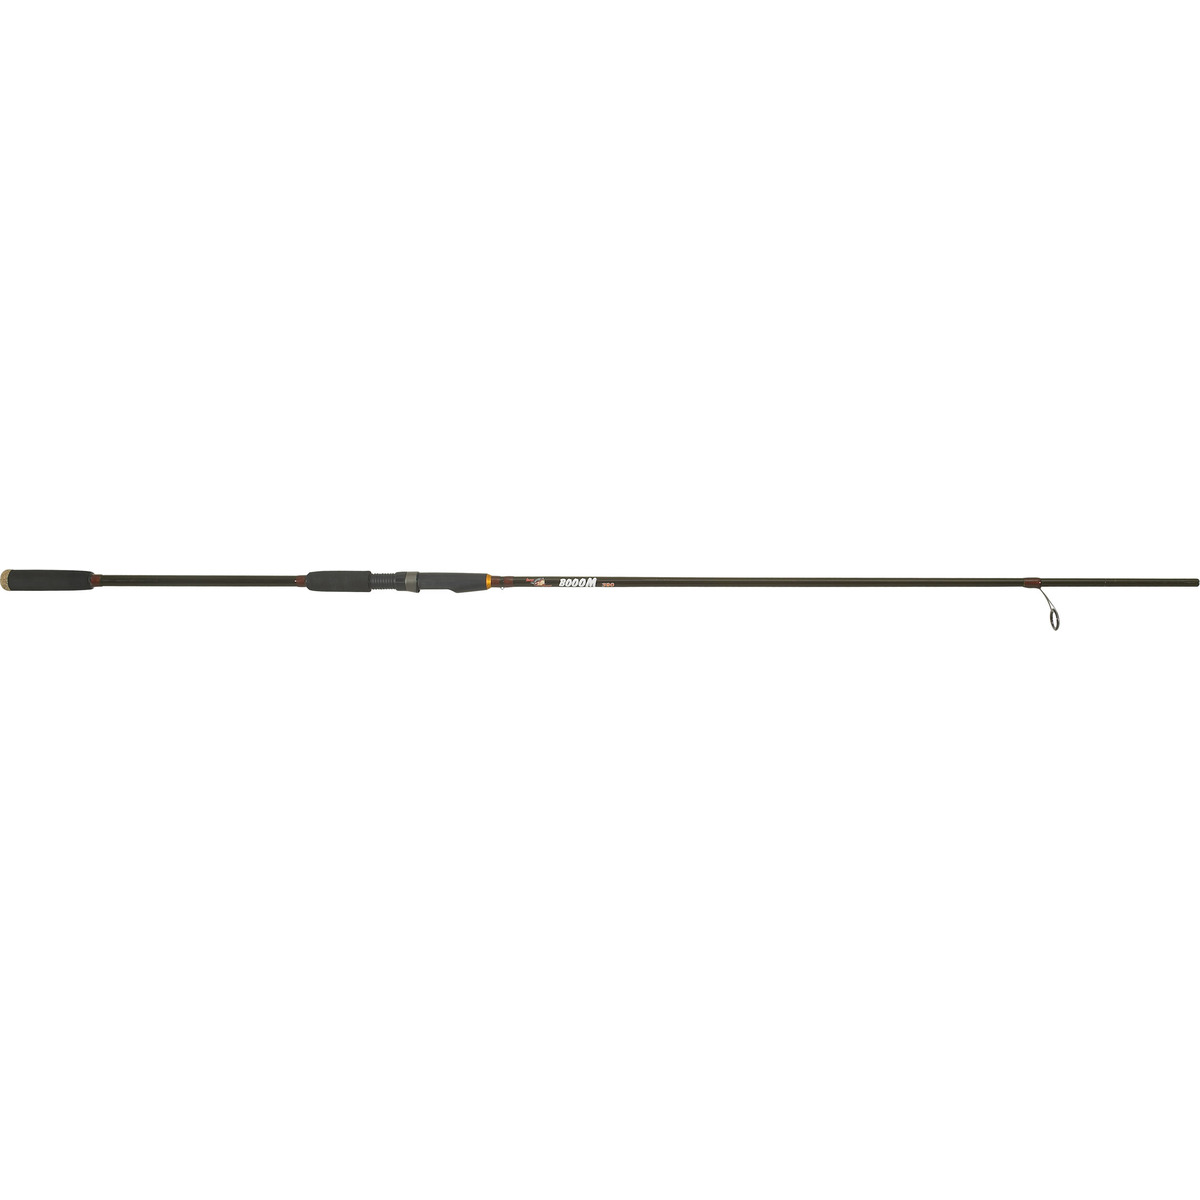 Iron Trout Boom - 390 -20 g